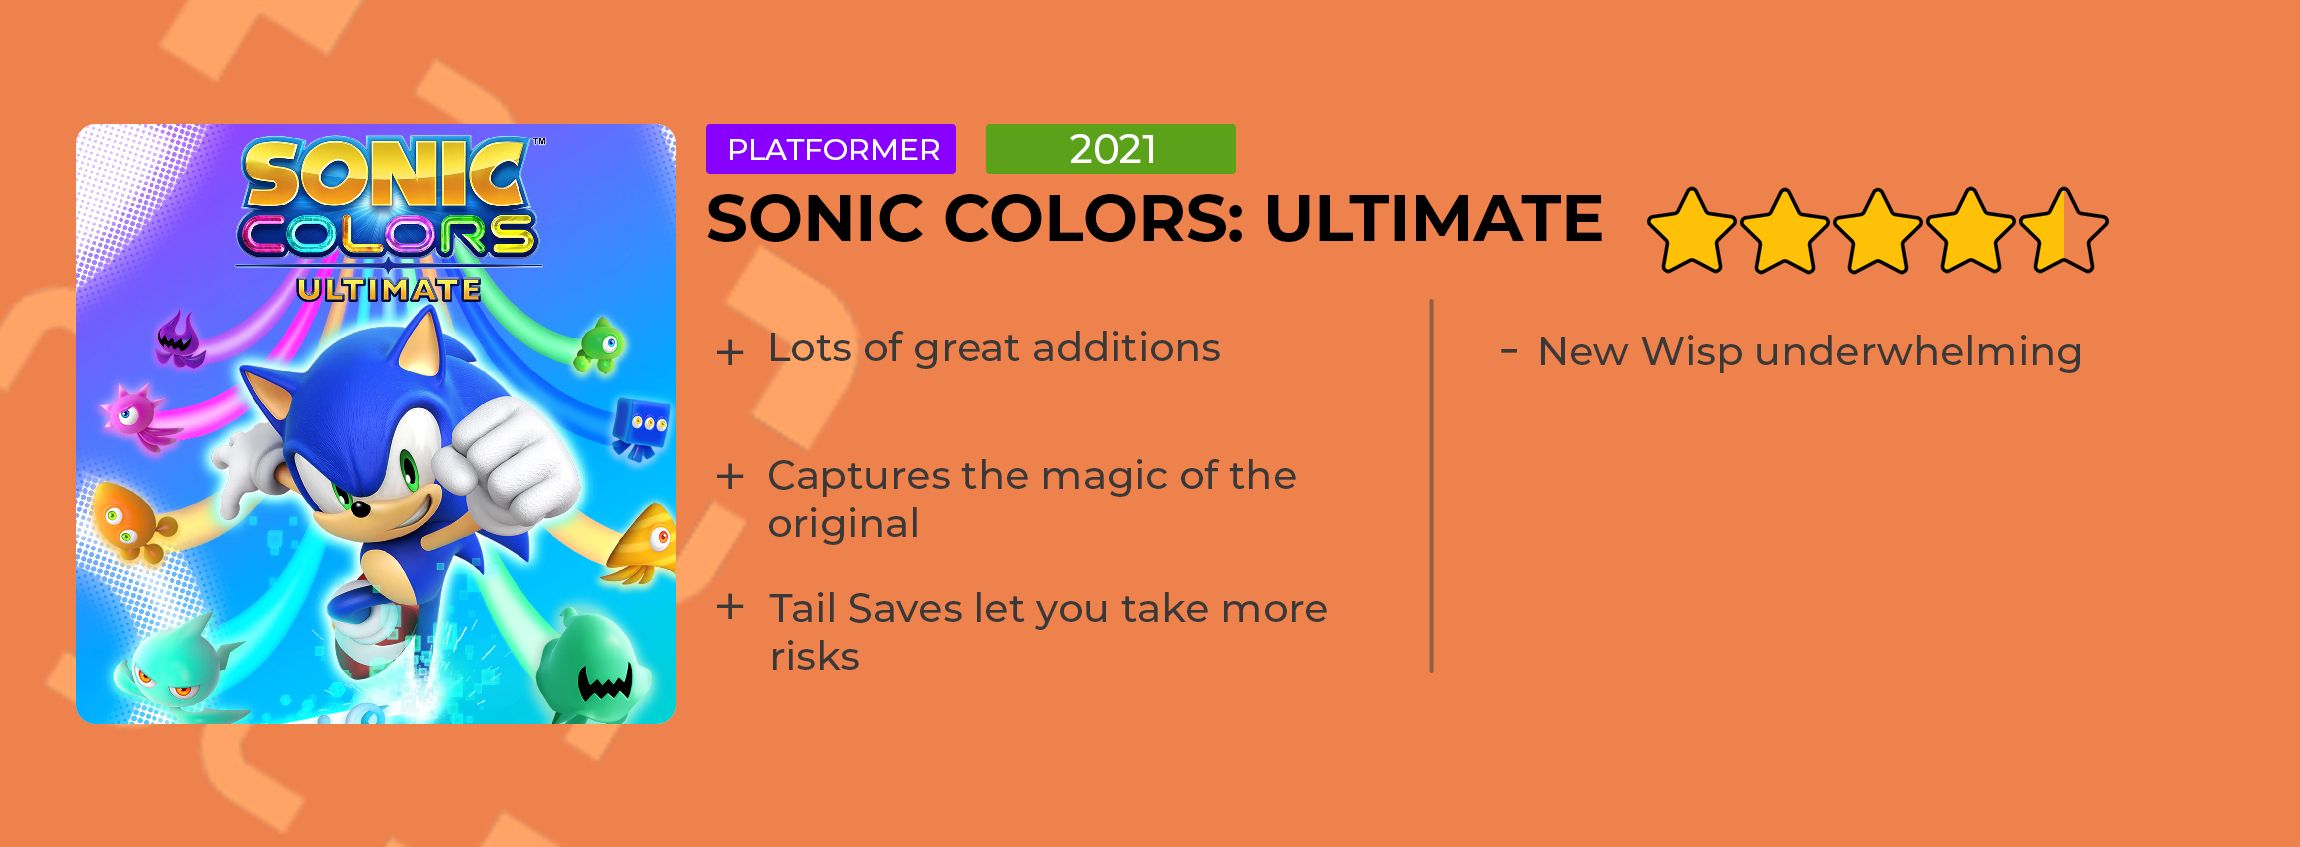 Sonic Colors Ultimate Review Card